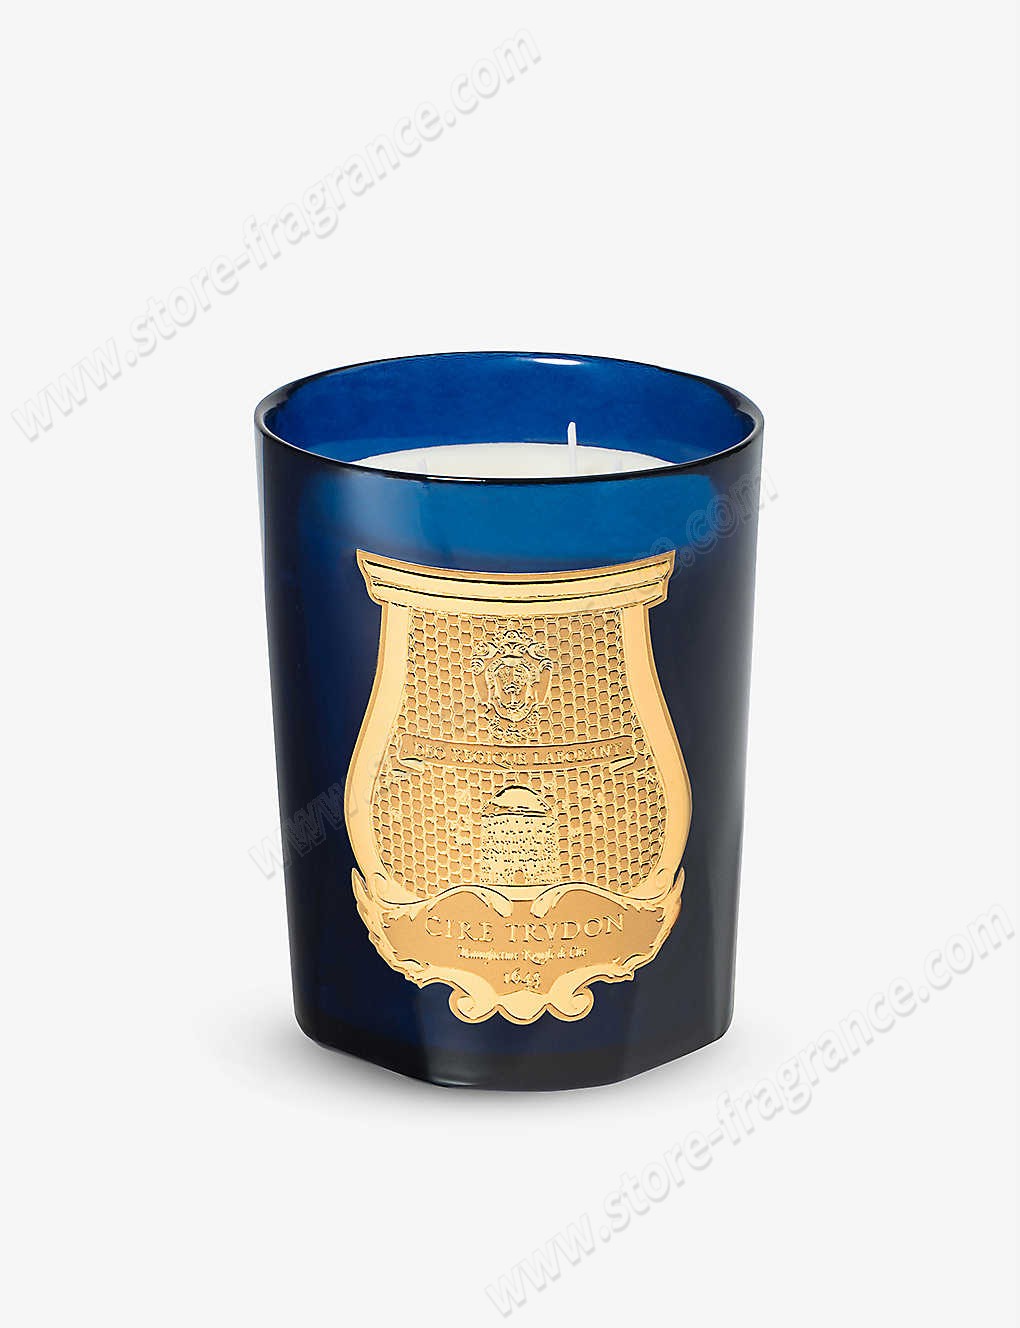 CIRE TRUDON/Maduraï scented candle 800g ✿ Discount Store - CIRE TRUDON/Maduraï scented candle 800g ✿ Discount Store